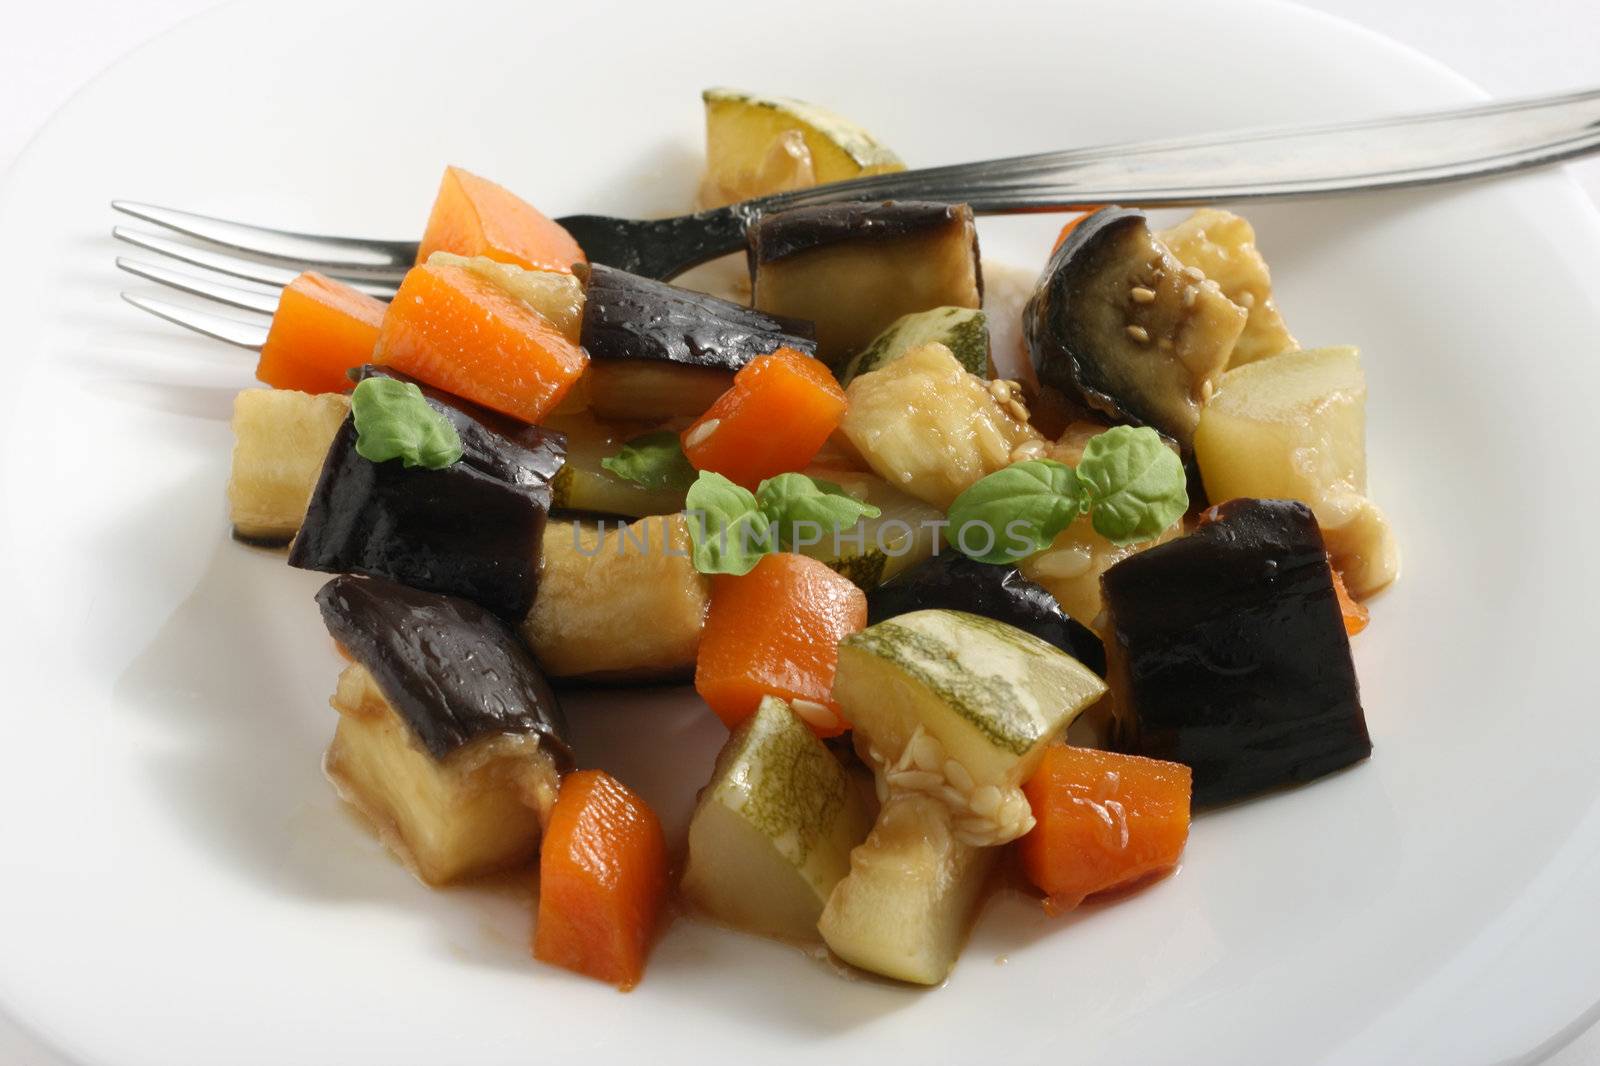 boiled vegetables with oil and soy sauce by nataliamylova